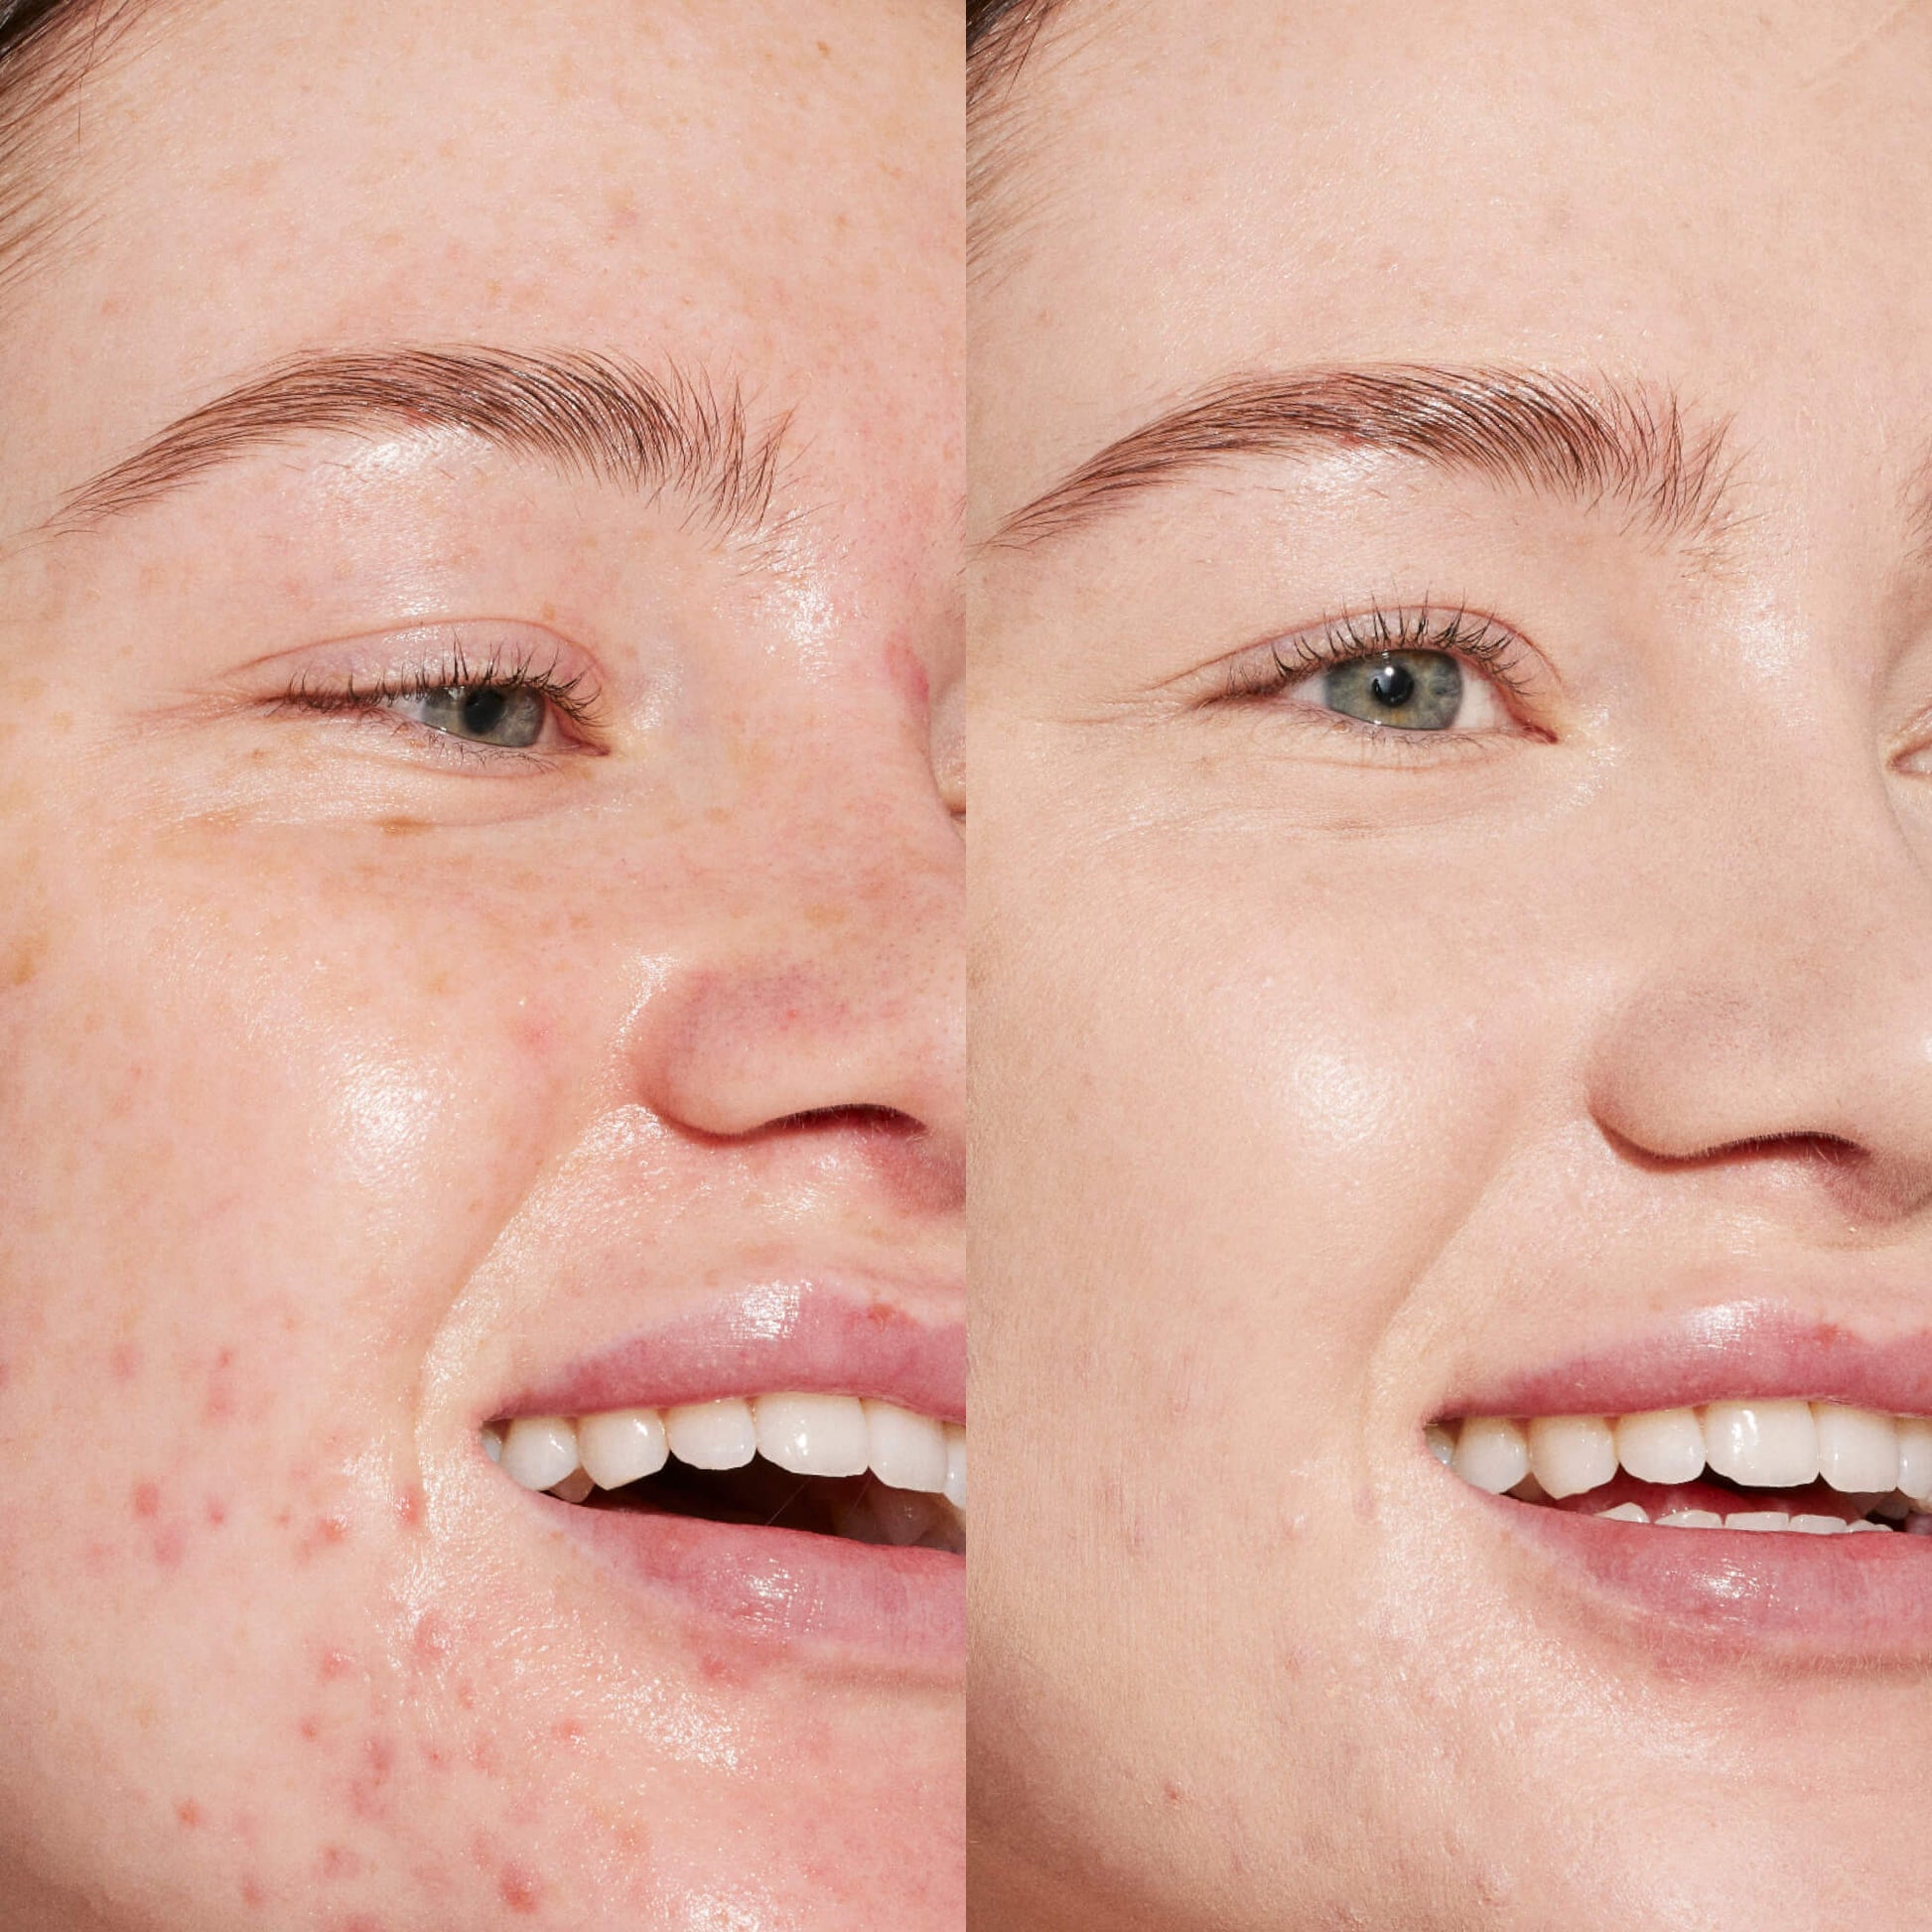 A person's face before and after using Tower 28 Beauty's Swipe Serum Concealer in shade 2.0 BU to cover up dark circles, blemishes, and discoloration